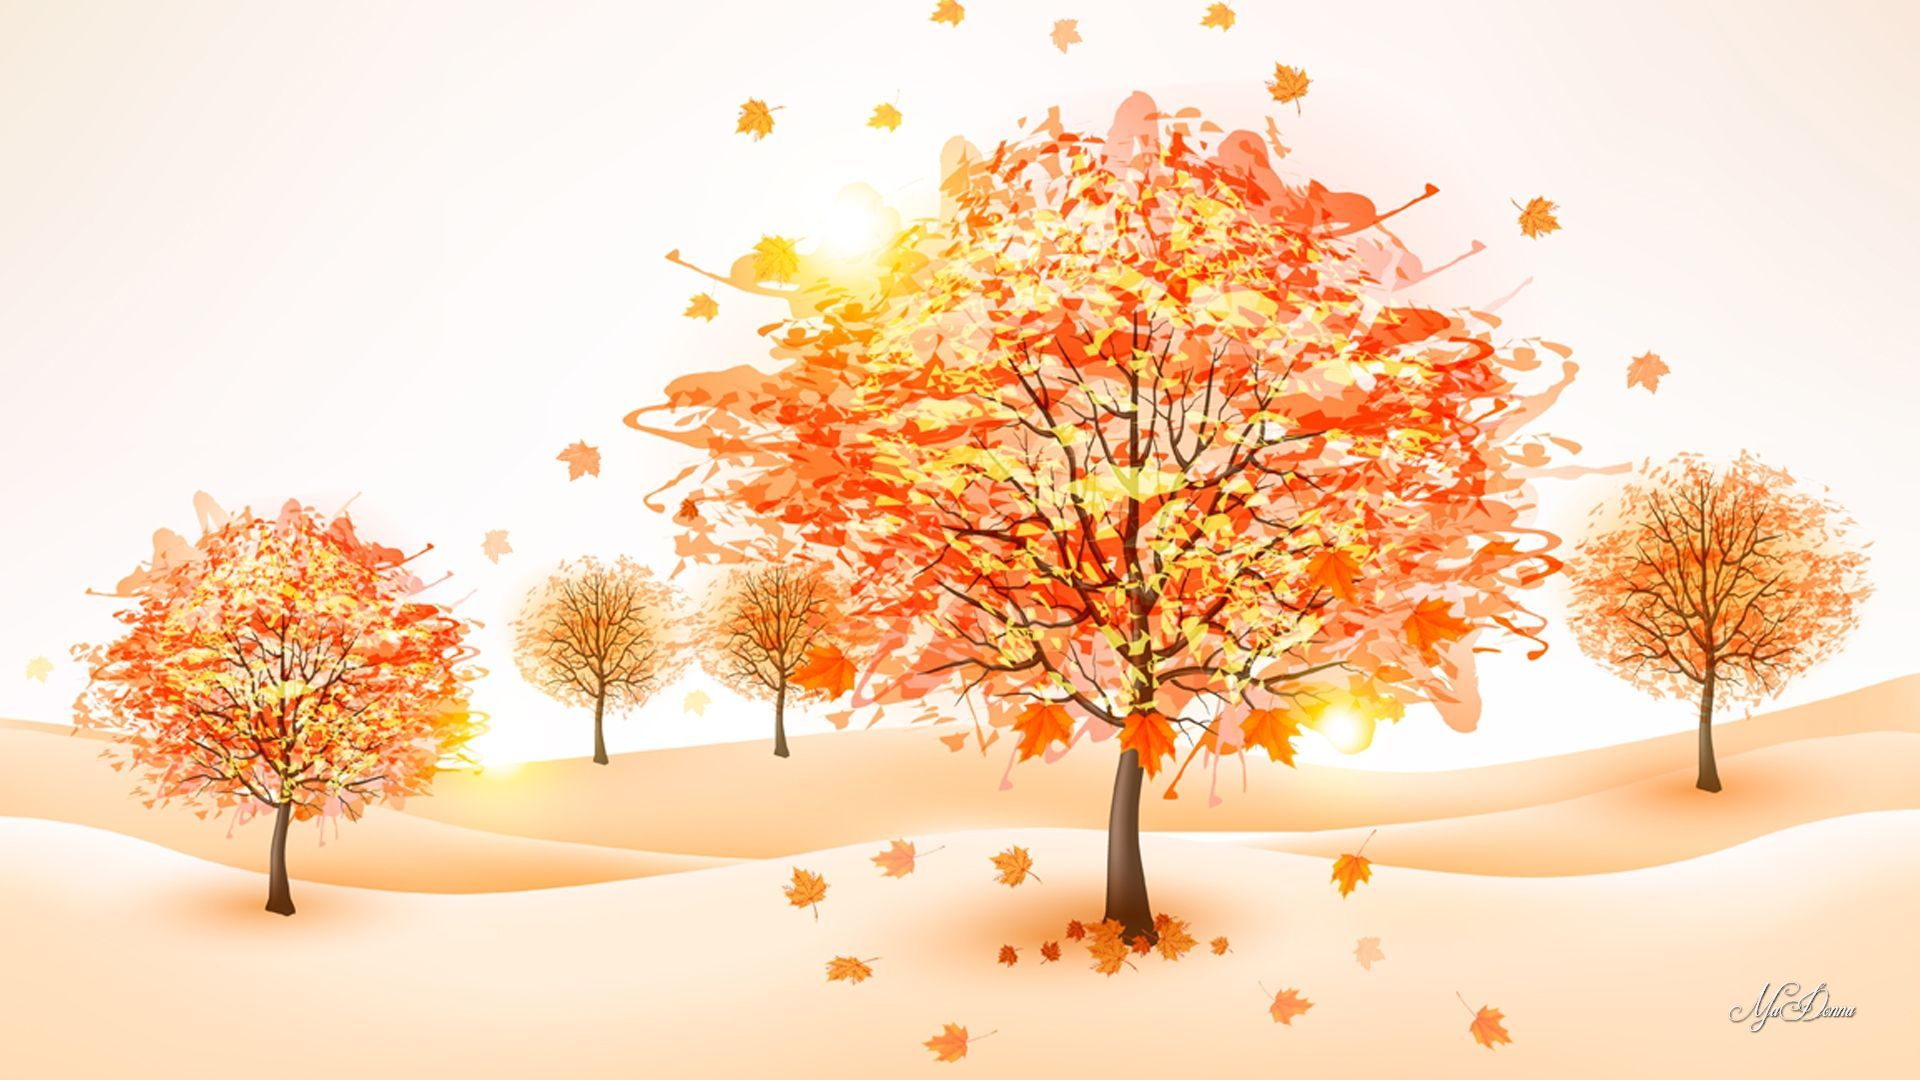 Adorable Cute fall desktop backgrounds for autumnal charm